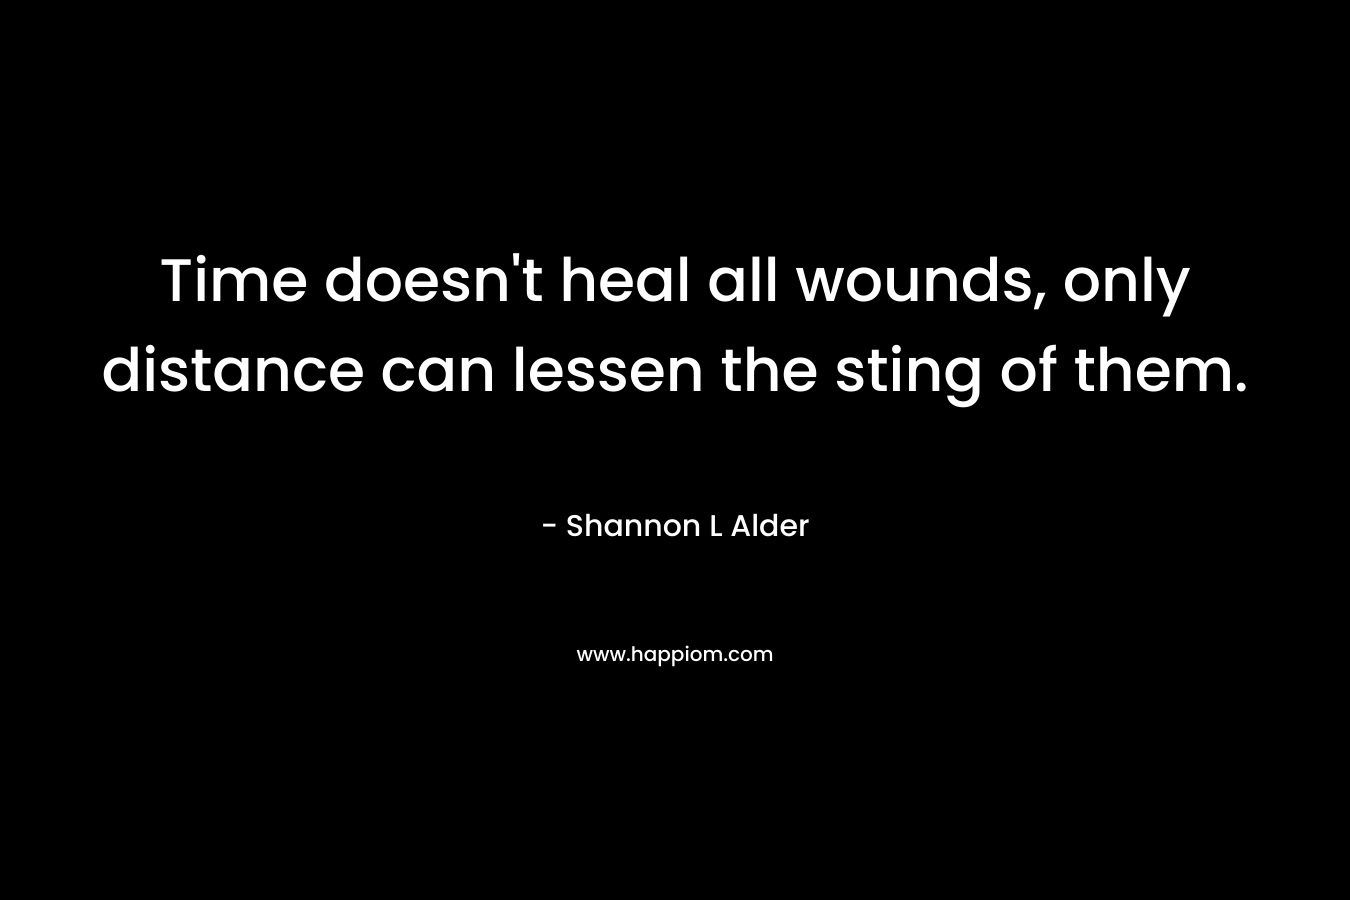 Time doesn’t heal all wounds, only distance can lessen the sting of them. – Shannon L Alder